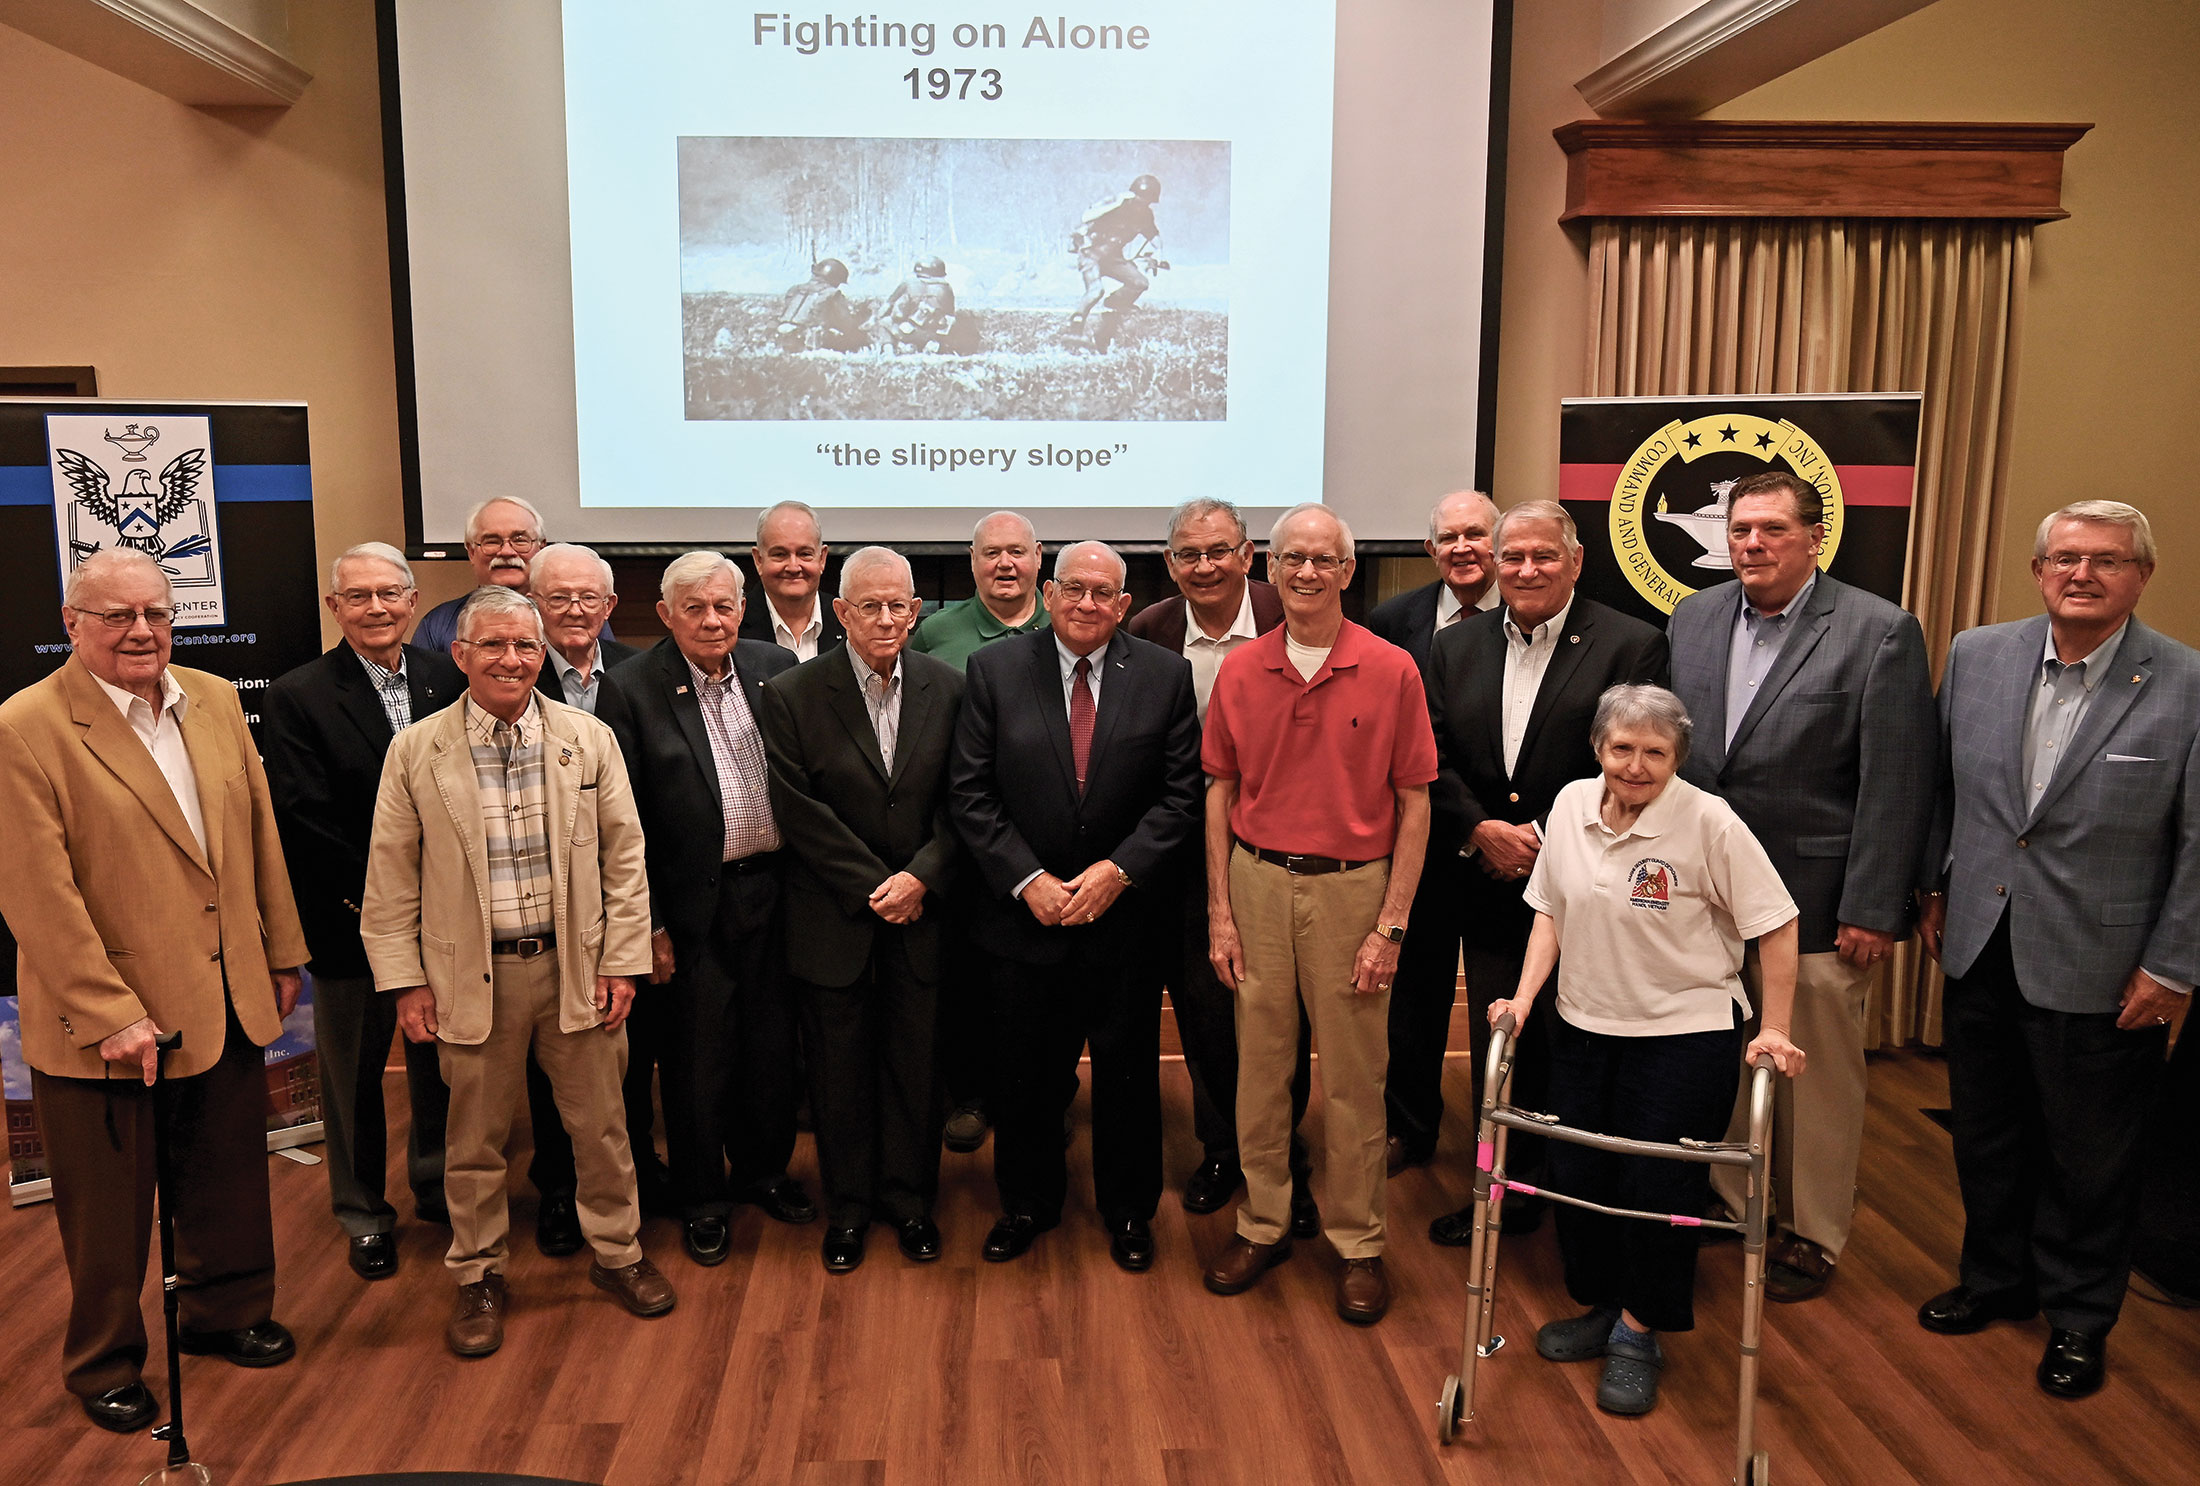 Vietnam veterans gather for a group photo after Dr. James H. Willbanks presented the 15th lecture in the CGSC Foundation's Vietnam War Commemoration Lecture Series on May 9, 2023, at the Riverfront Community Center in downtown Leavenworth, Kansas.